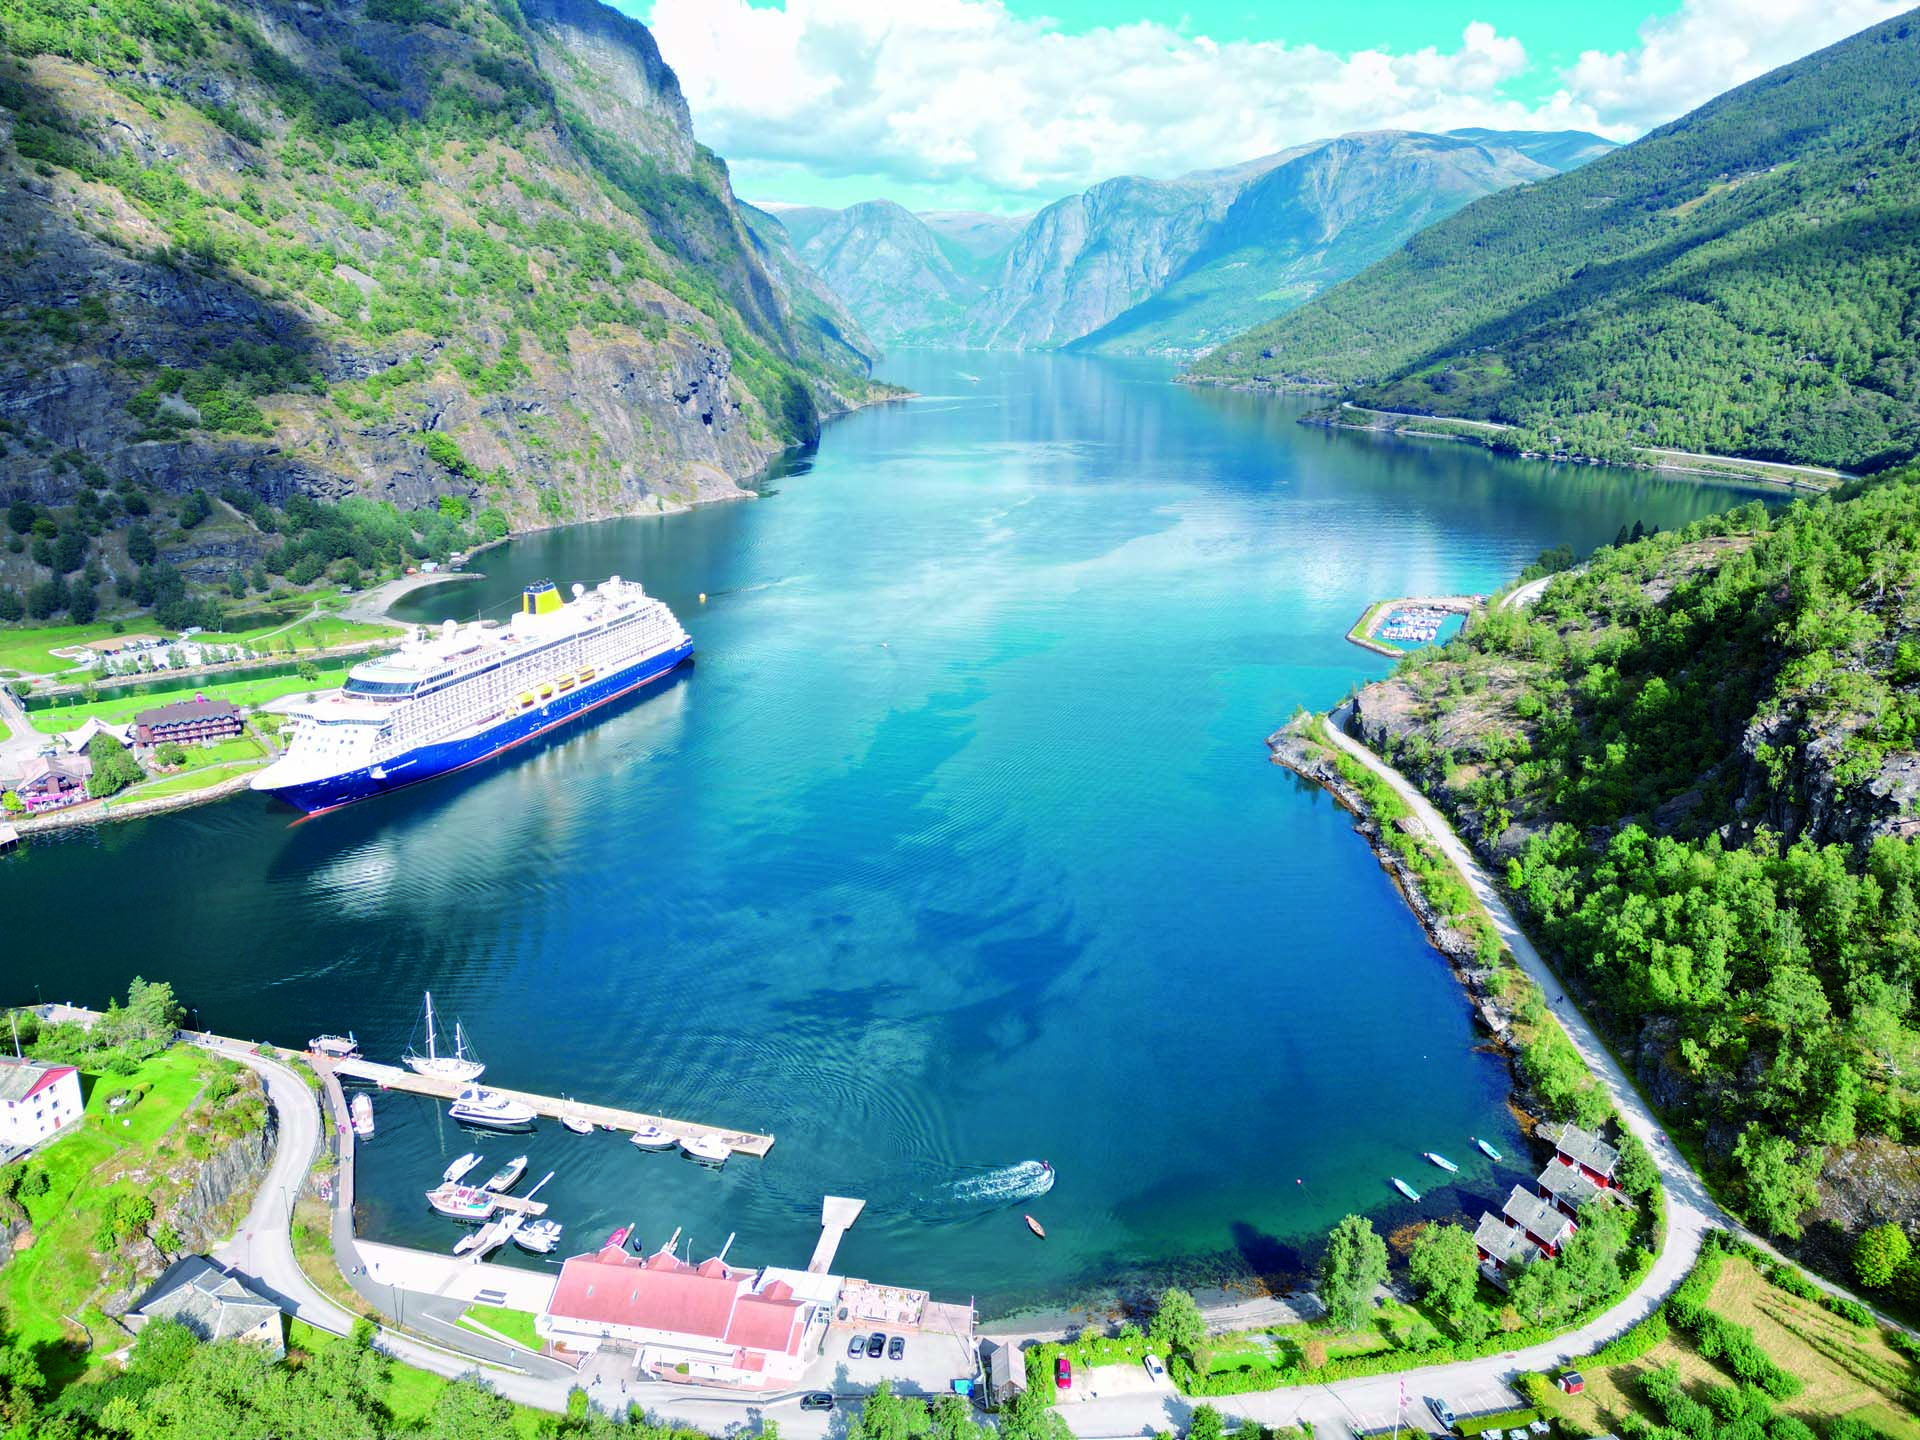 Spirit of Discovery cruise ship moored in a Norweigian fjord